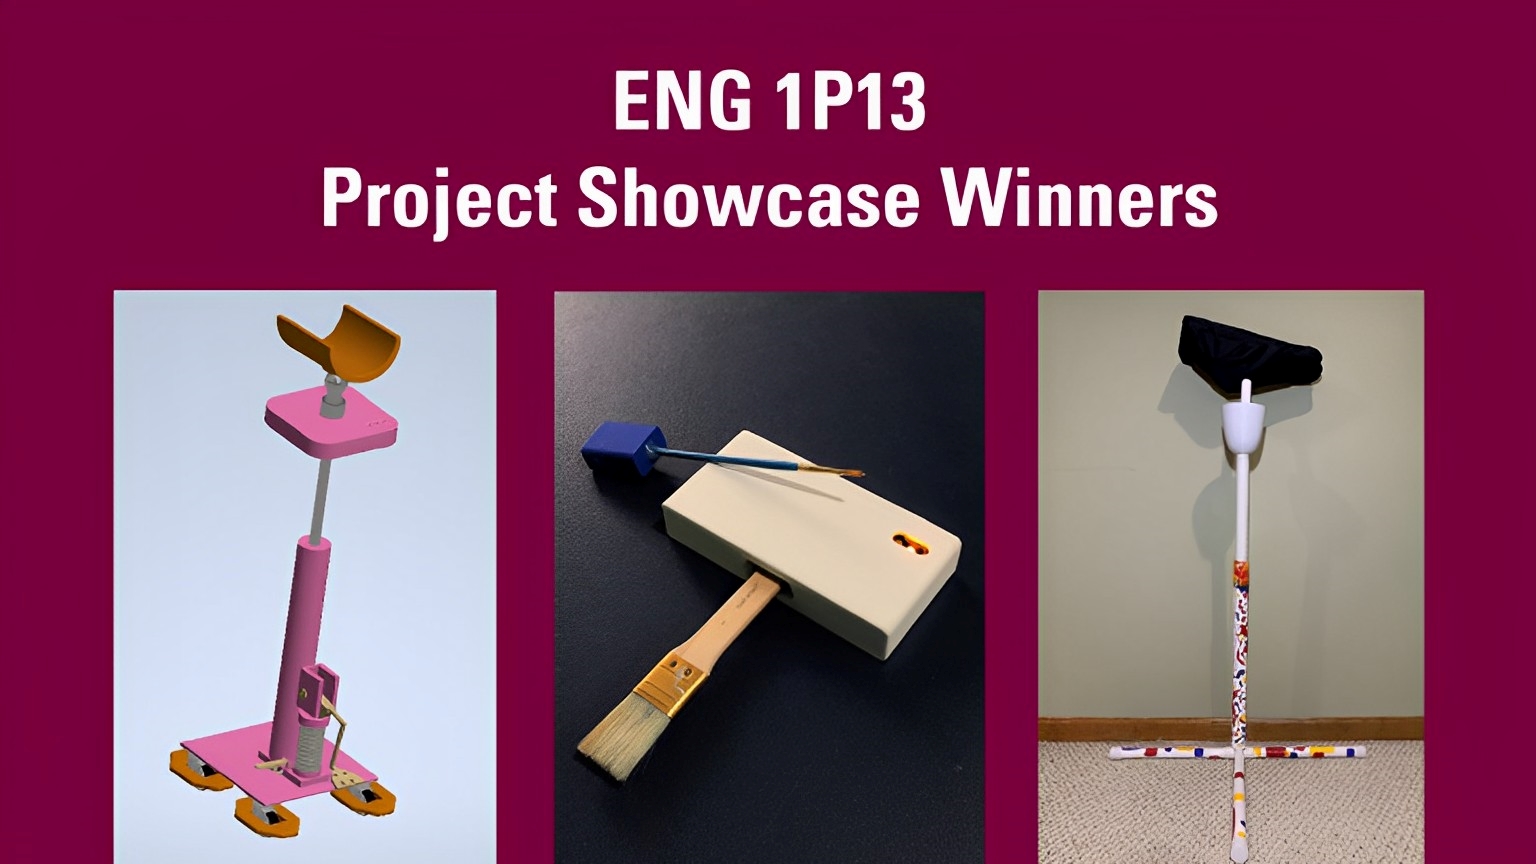 Three project winners from the 1P13 showcase are displayed.